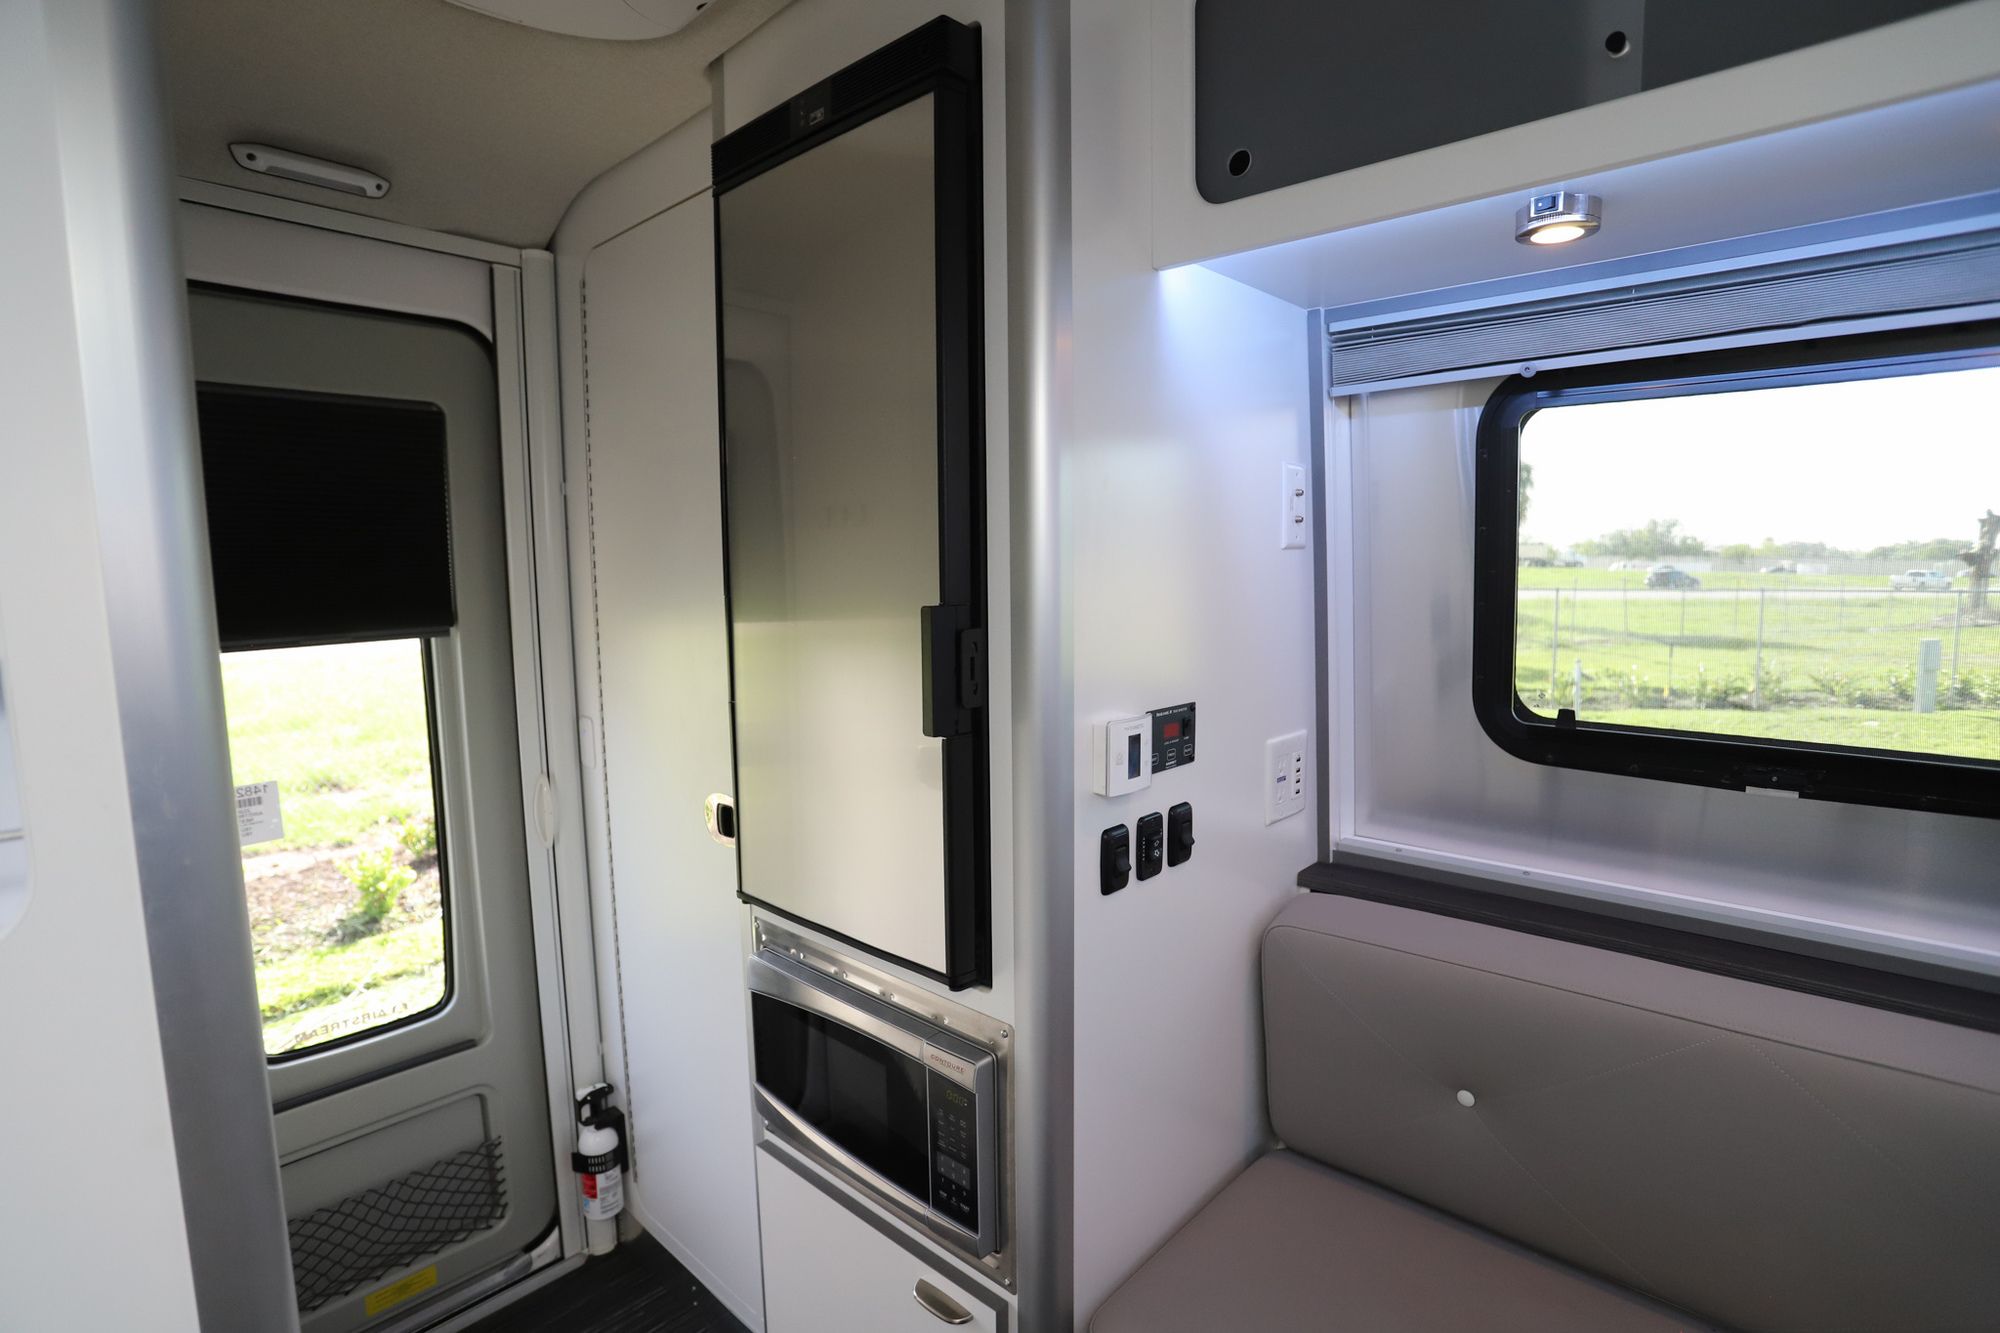 Used 2020 Airstream Nest 16U Travel Trailer  For Sale